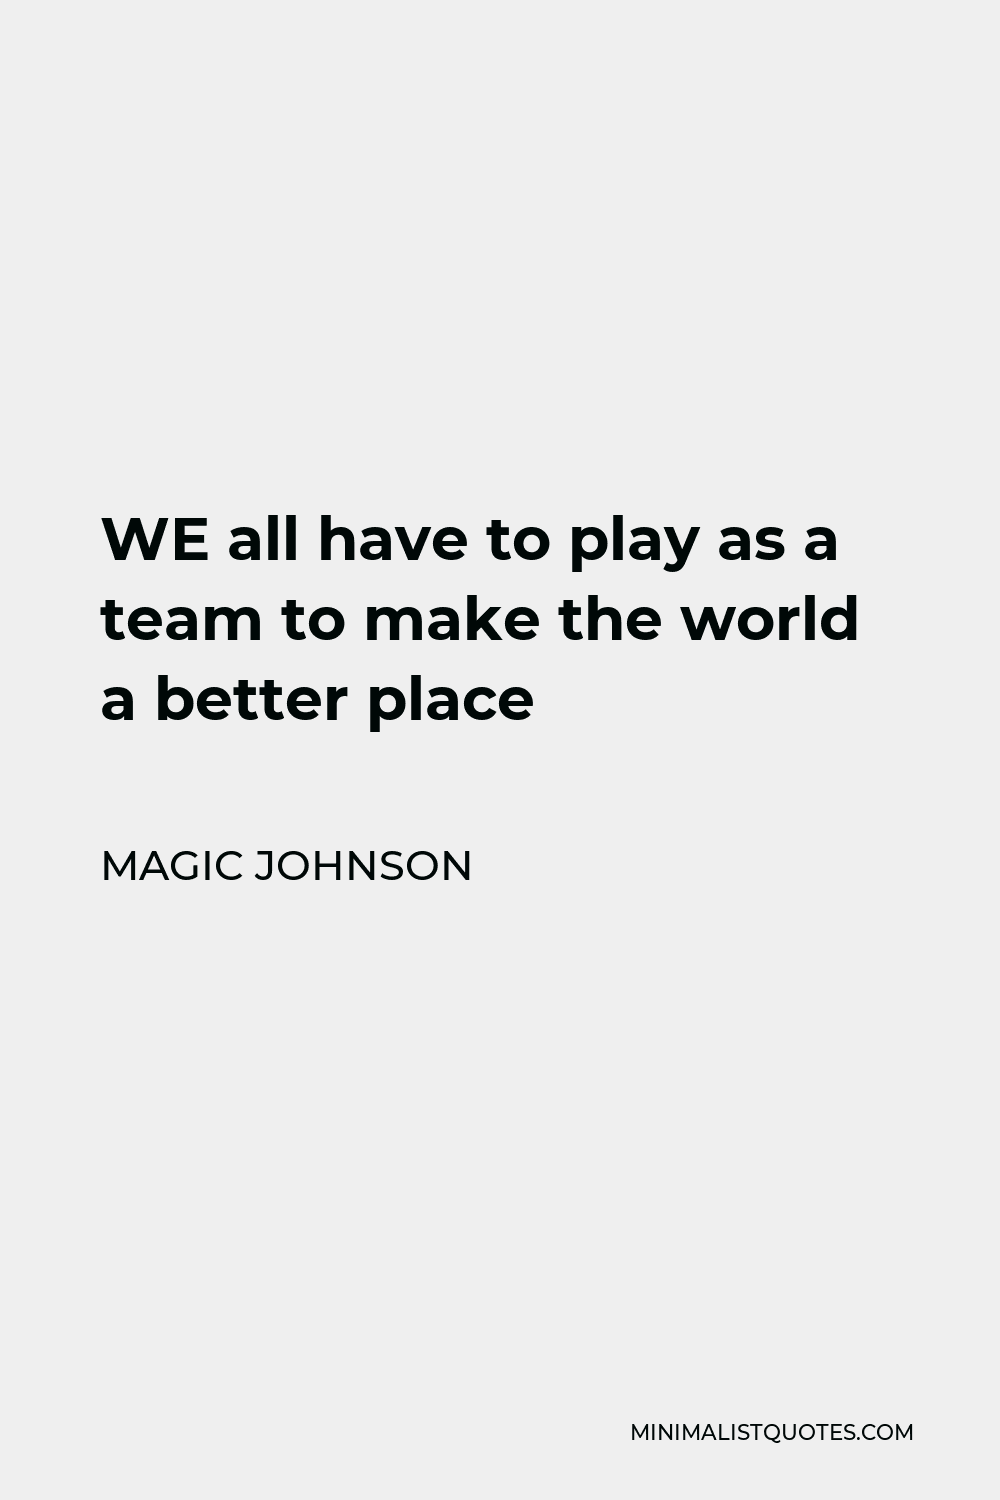 Magic Johnson Quote - WE all have to play as a team to make the world a better place